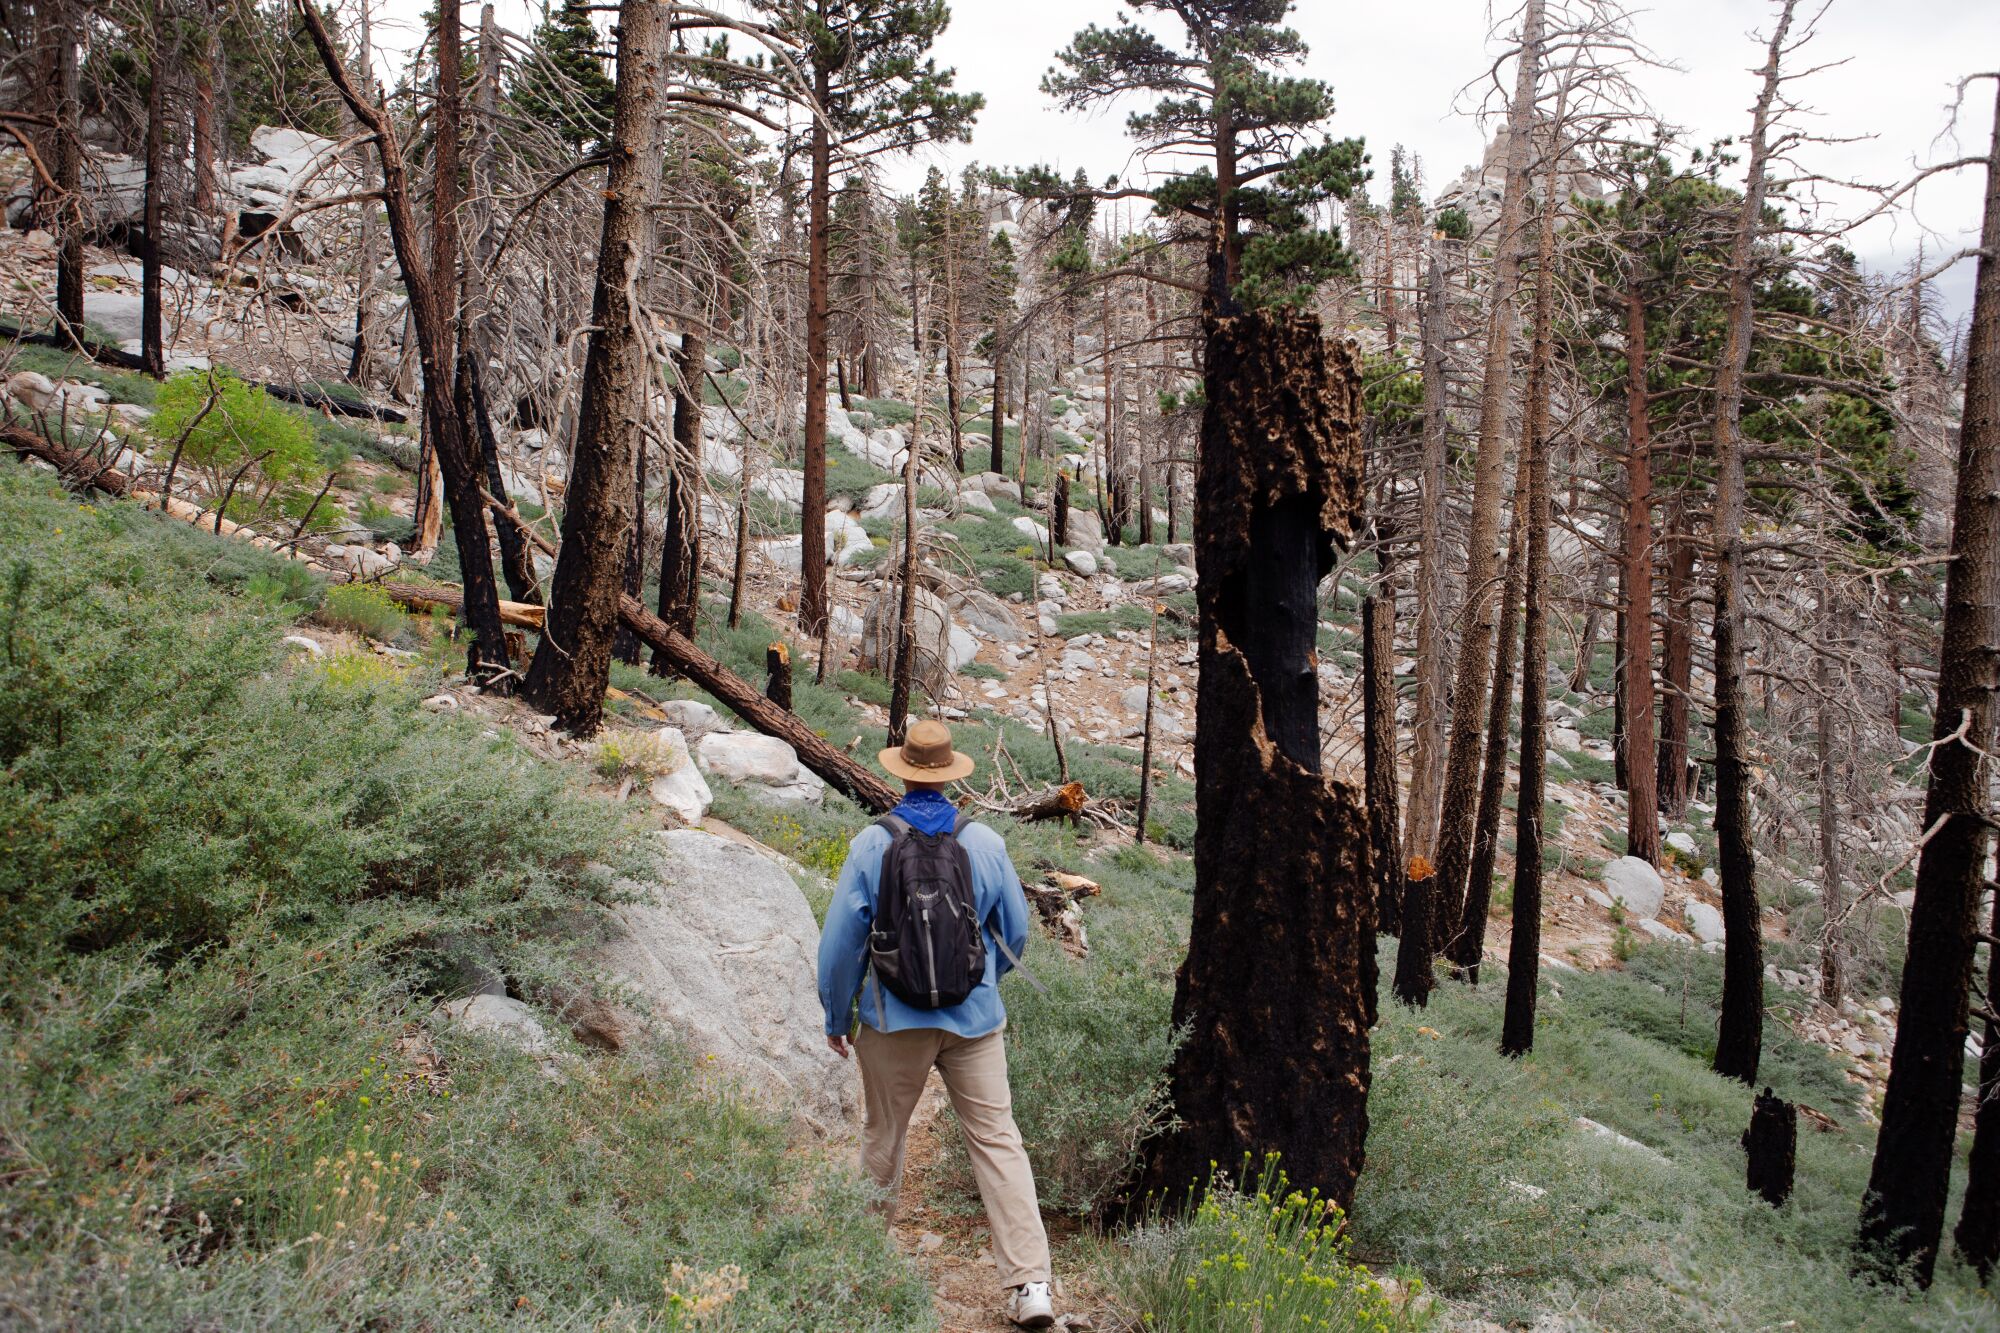 A man hikes through a forest with old burns on tree trunks.